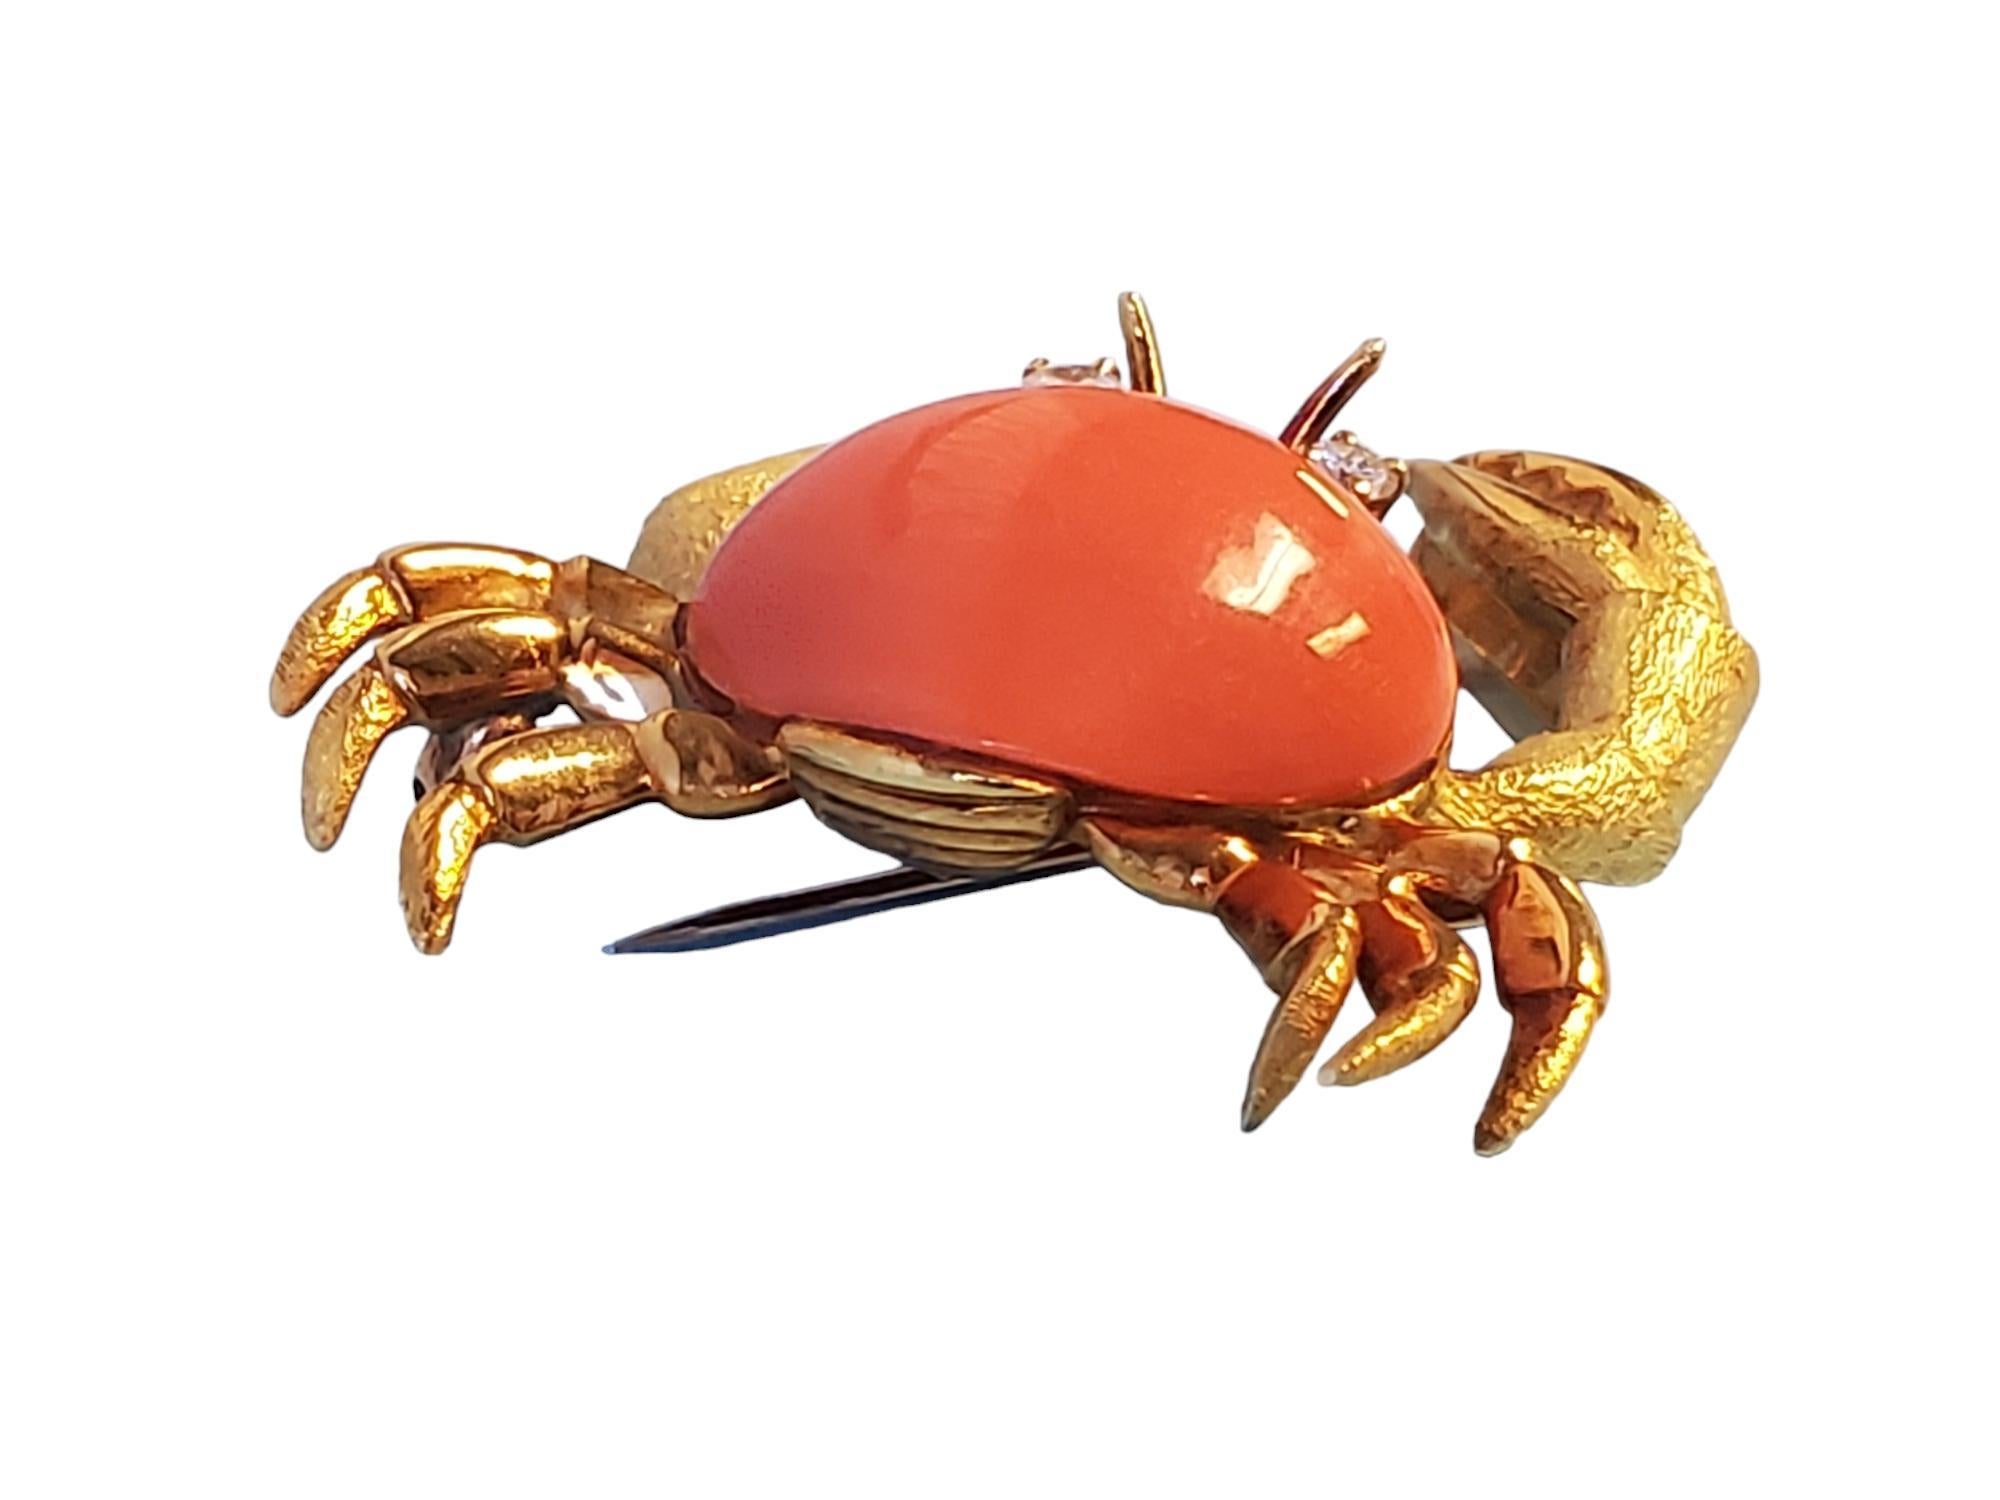 Estate Vintage Crab Brooch Pin 18k Yellow Gold Angel Skin Coral Body VS Diamonds In Good Condition For Sale In Overland Park, KS